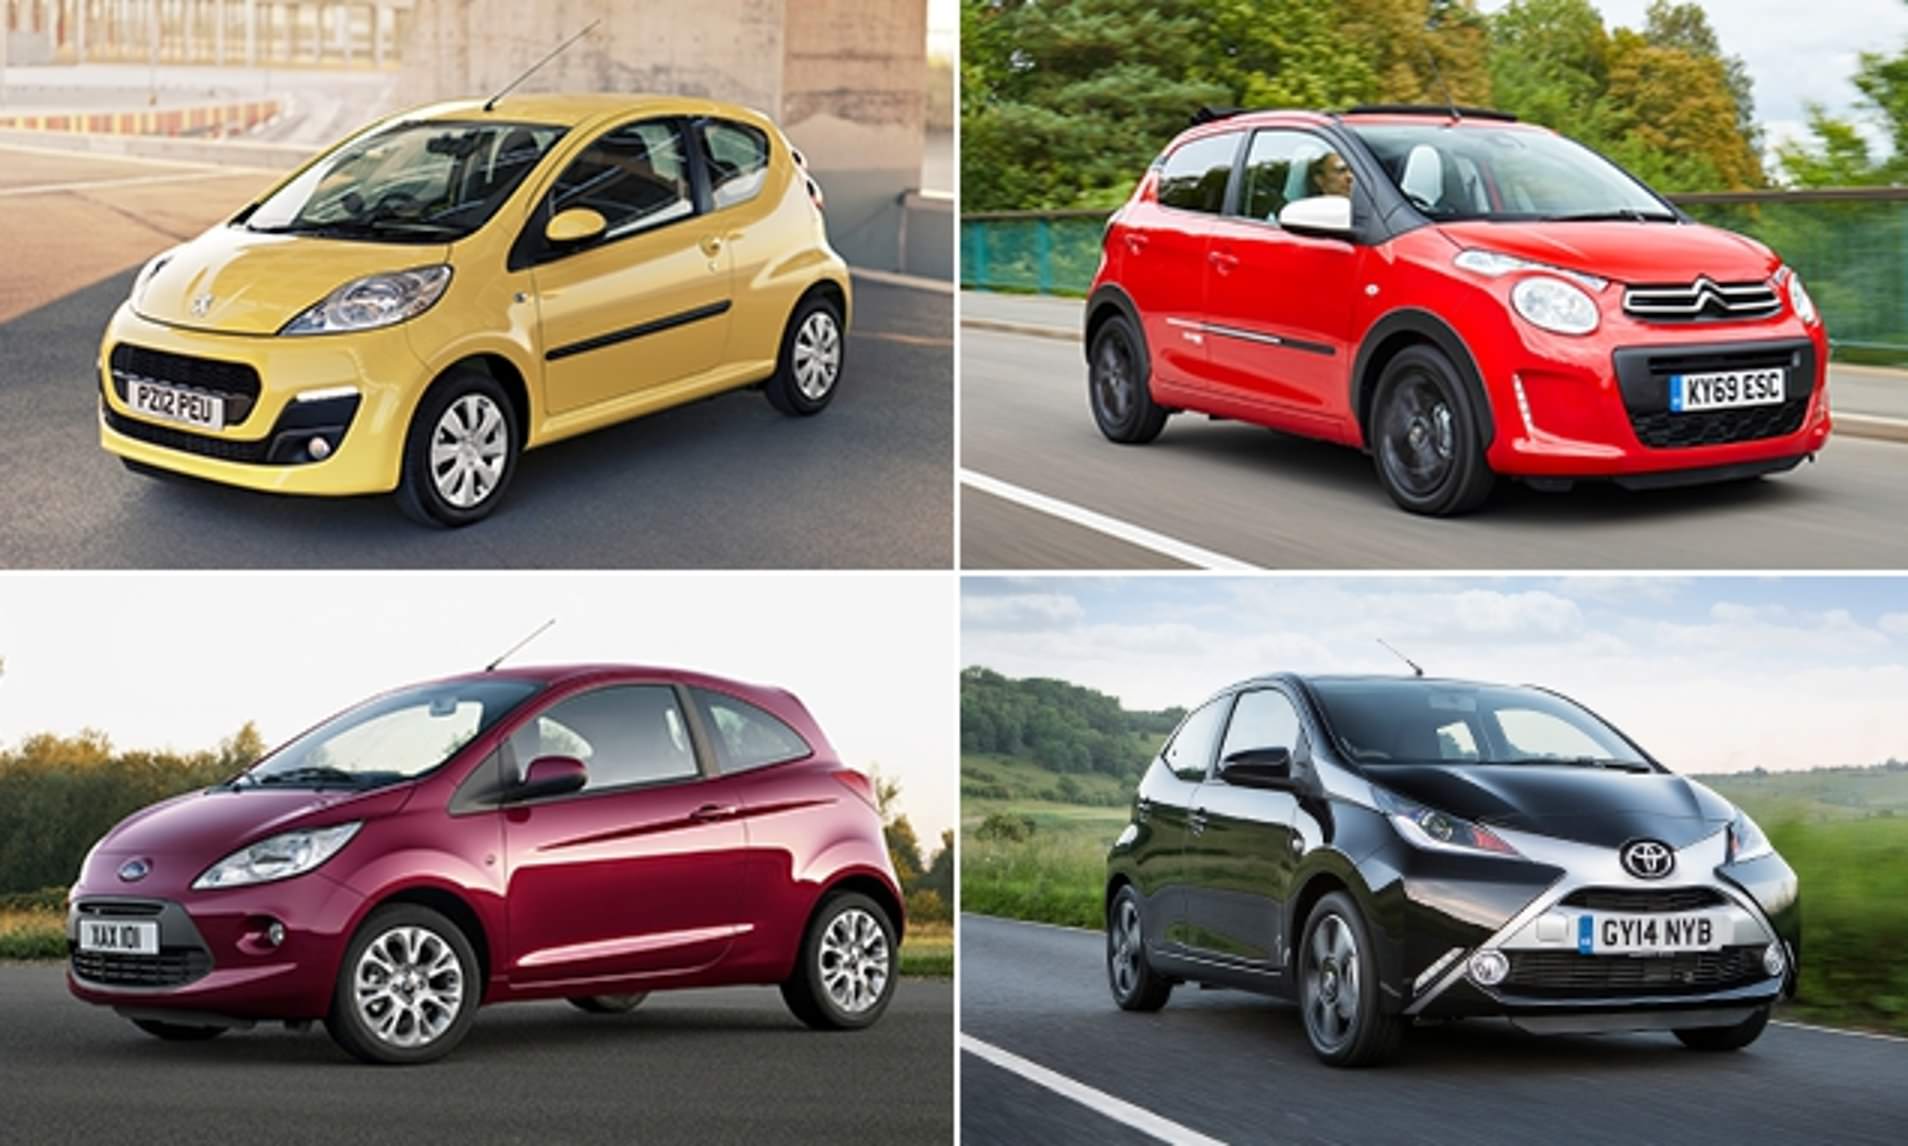 What's the cheapest car for first time drivers?